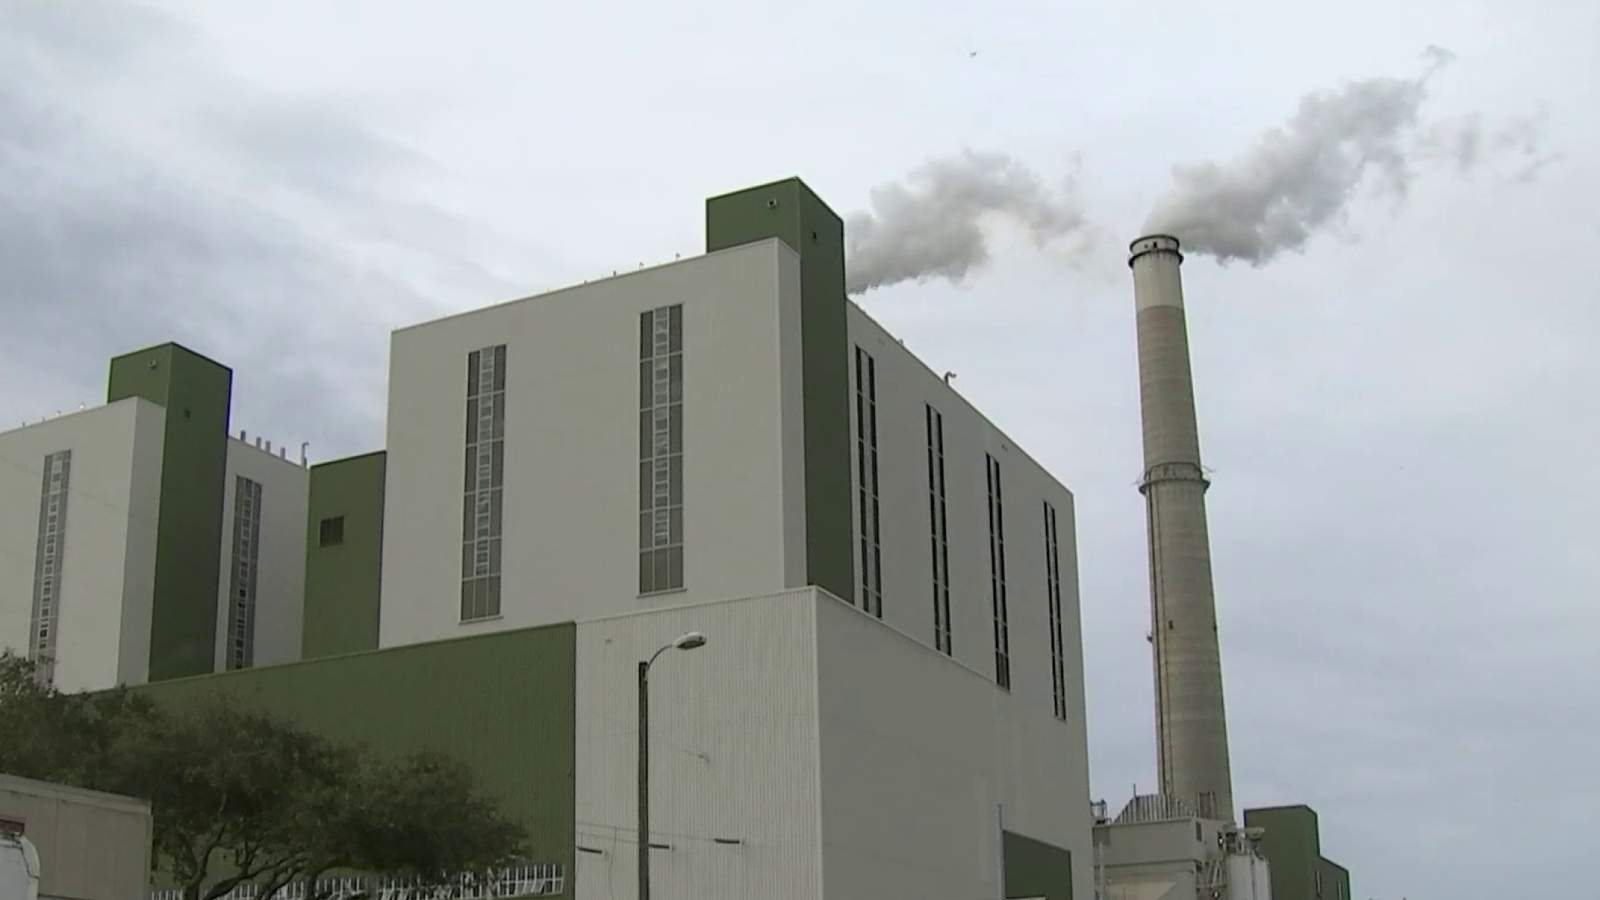 Here’s why residents welcome changes at Orlando’s Stanton Energy Plant